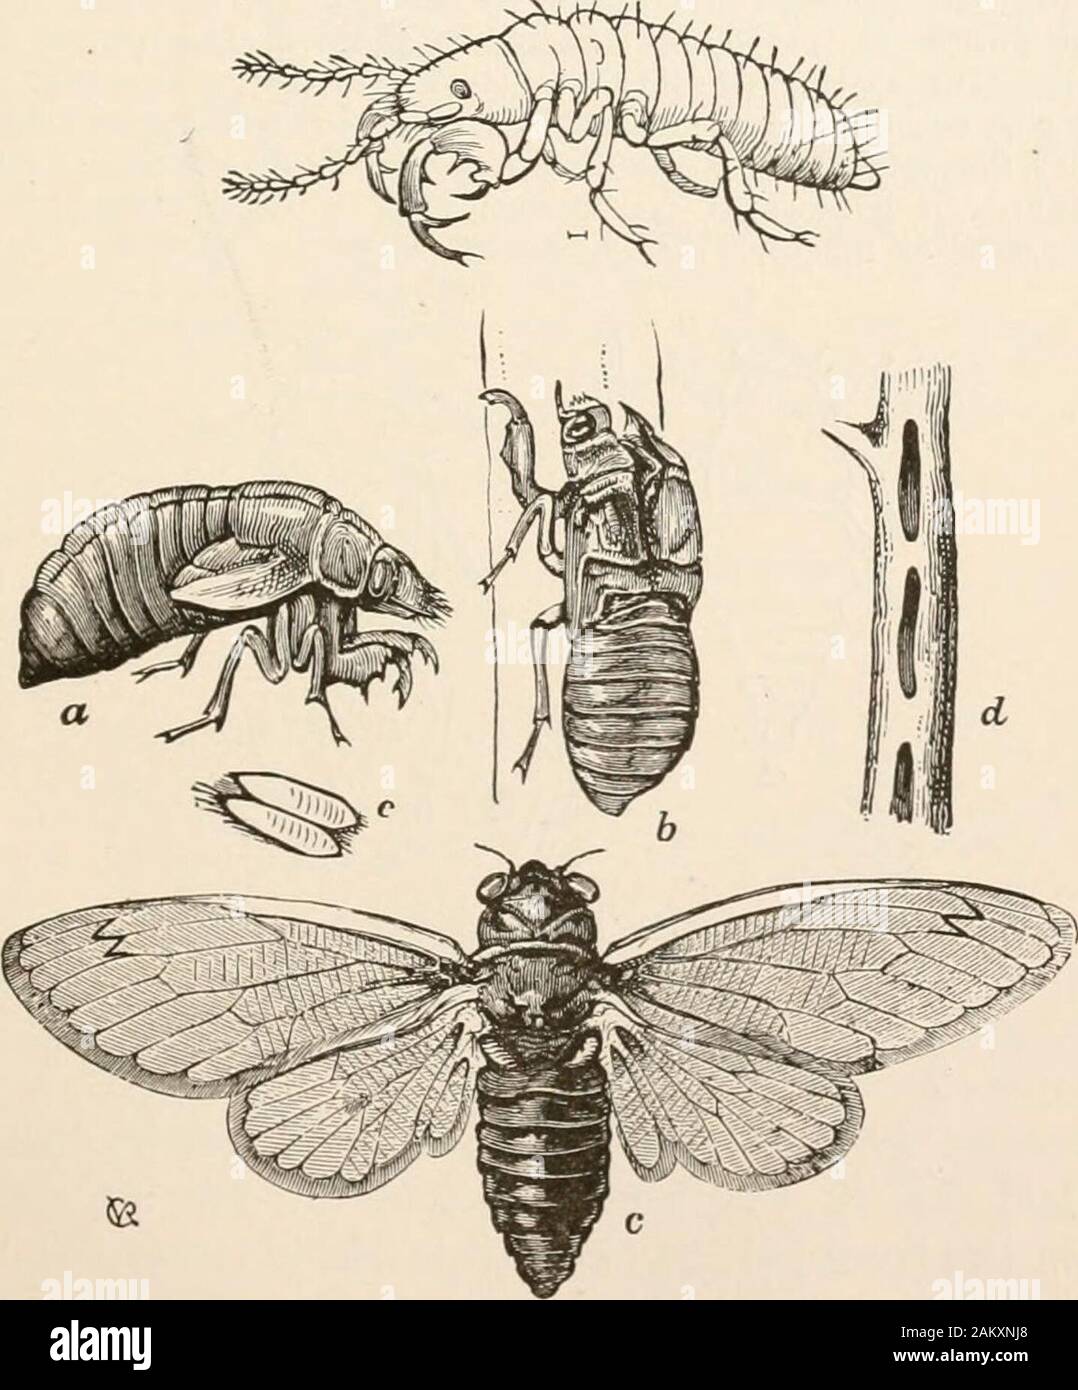 Entomology for beginners; for the use of young folks, fruitgrowers, farmers, and gardeners; . FIG. W.—Psylla tripunctata.—After Riley. are generally conical, with a broad head, with long, 10-jointed an-tennaj and short legs, the hinder ones adapted for springing; the. FIG. 68.—Seventeen-year Cicada. A. larva; o, pupa; b, its cast skin splitthe back; e. eggs; d, gashes made for them in a twig. All except A naturalsize.—After Riley. 6 82 ENTOMOLOGY. wings are thickened, folded roof-like over the body, while the youngare often covered with a white cottony mass. Psylla pyri Schmidtinjures the pear Stock Photo